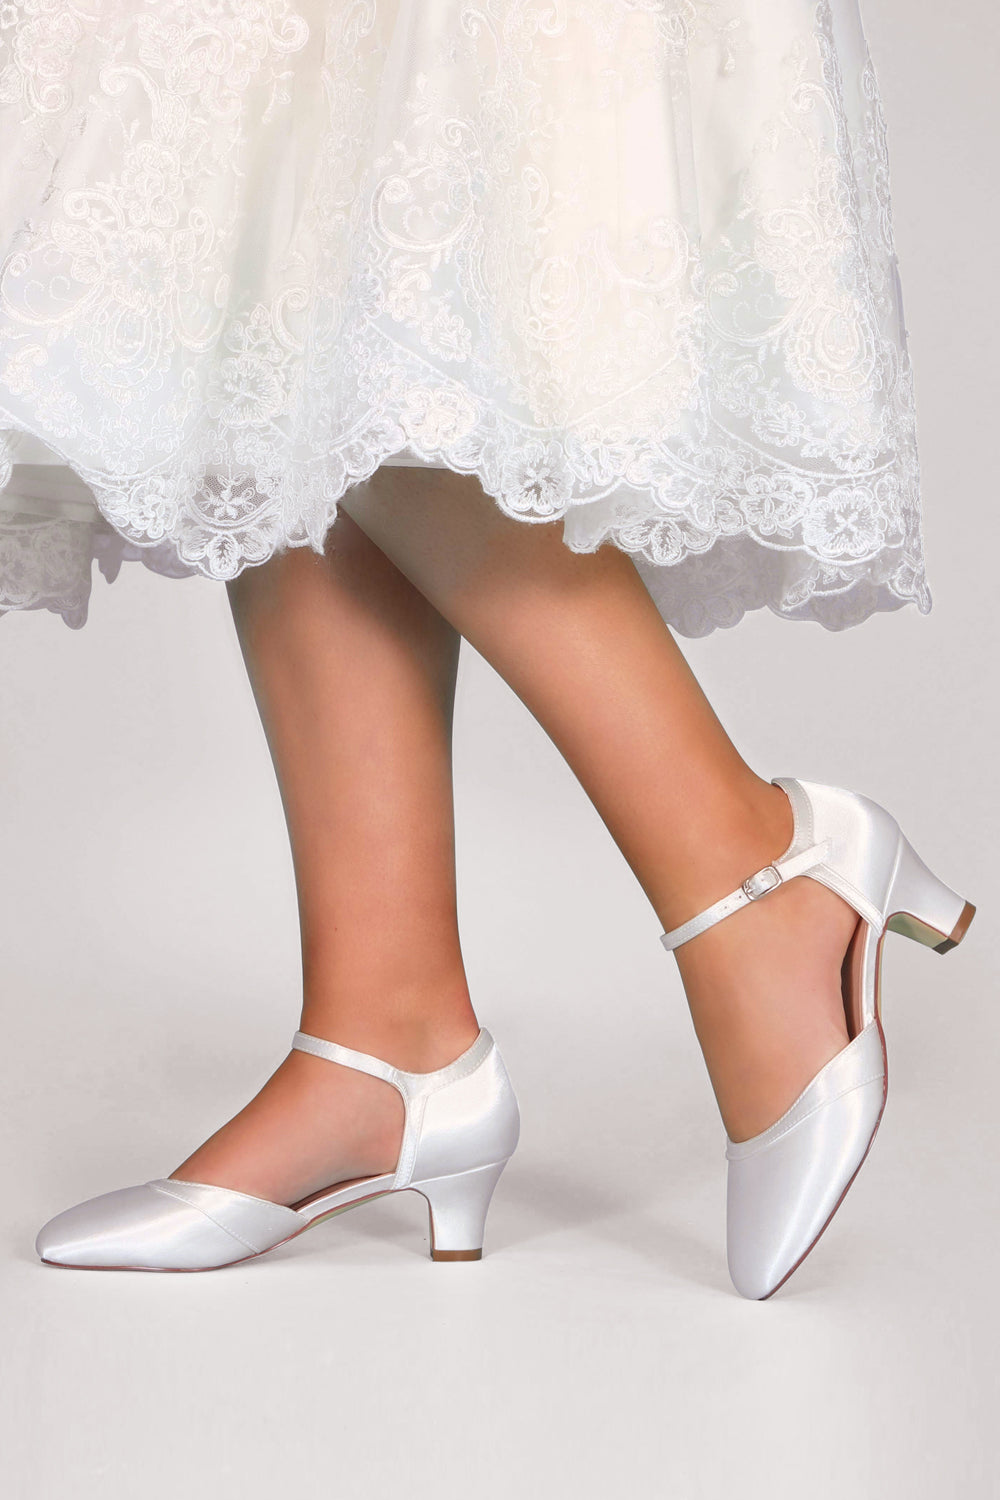 Elegant White Bridal Wedding Wedding Shoes For Bride With Pearl Sparkle  Crystals, Pointed Toe, Satin Beading, Chunky High Heel CL03334 From  Allloves, $53.06 | DHgate.Com